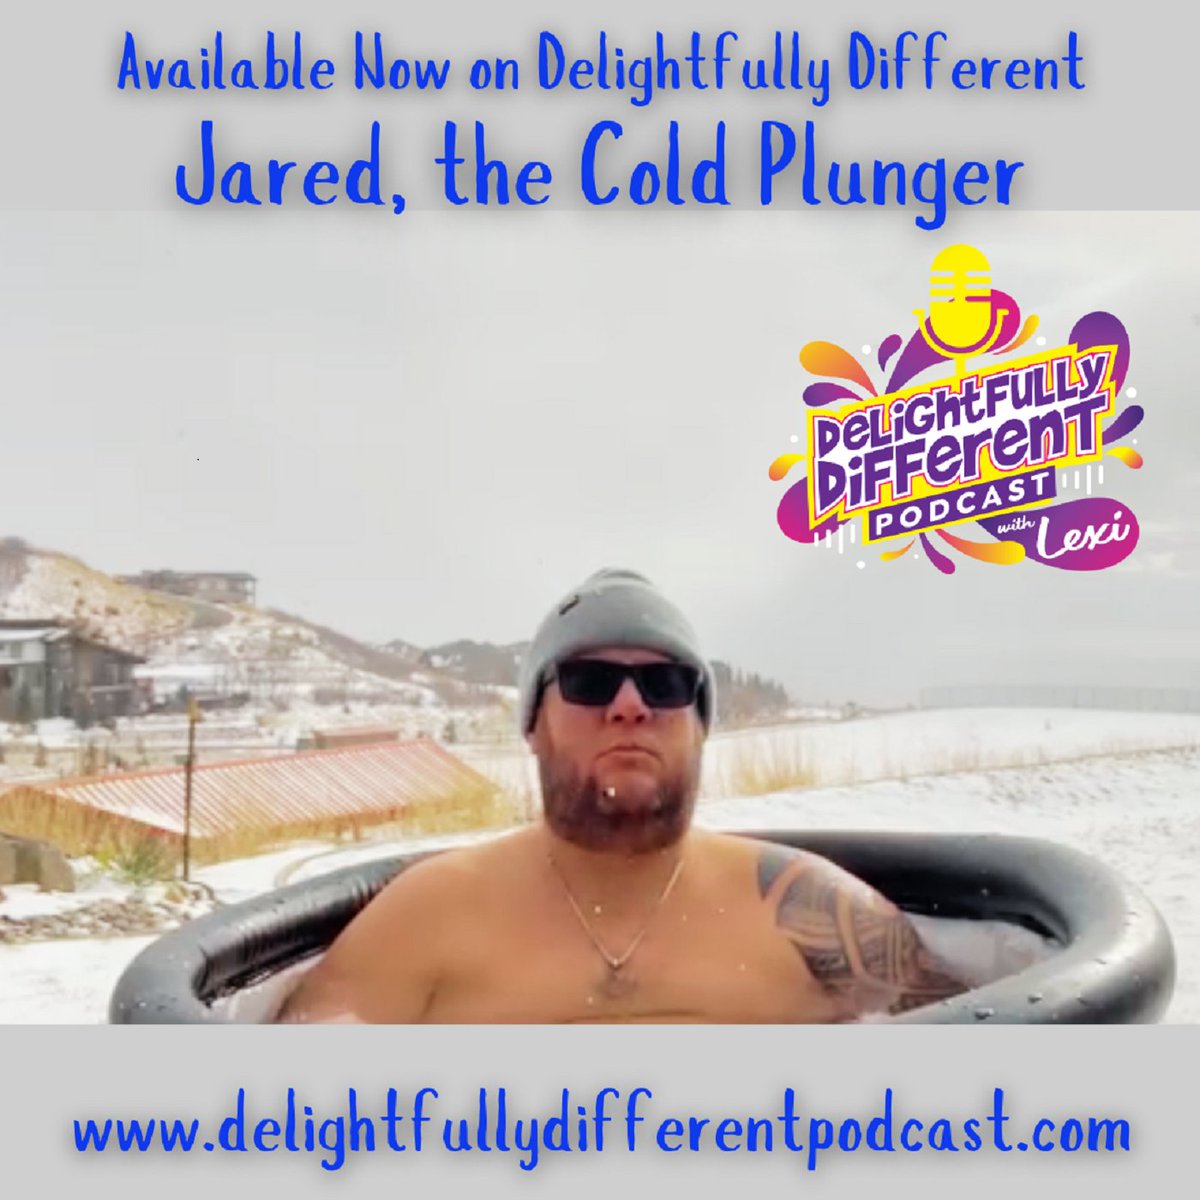 #NewEpisodeAlert - Delightfully Different Podcast Delightfully.lnk.to/ColdPlunger Jared Is A Cold Plunger. He gets into an ice bath everyday, even in the Winter. He says it’s good for physical and mental health. He even owns a special tub for his cold plunge. #Listen #icebath #podcast